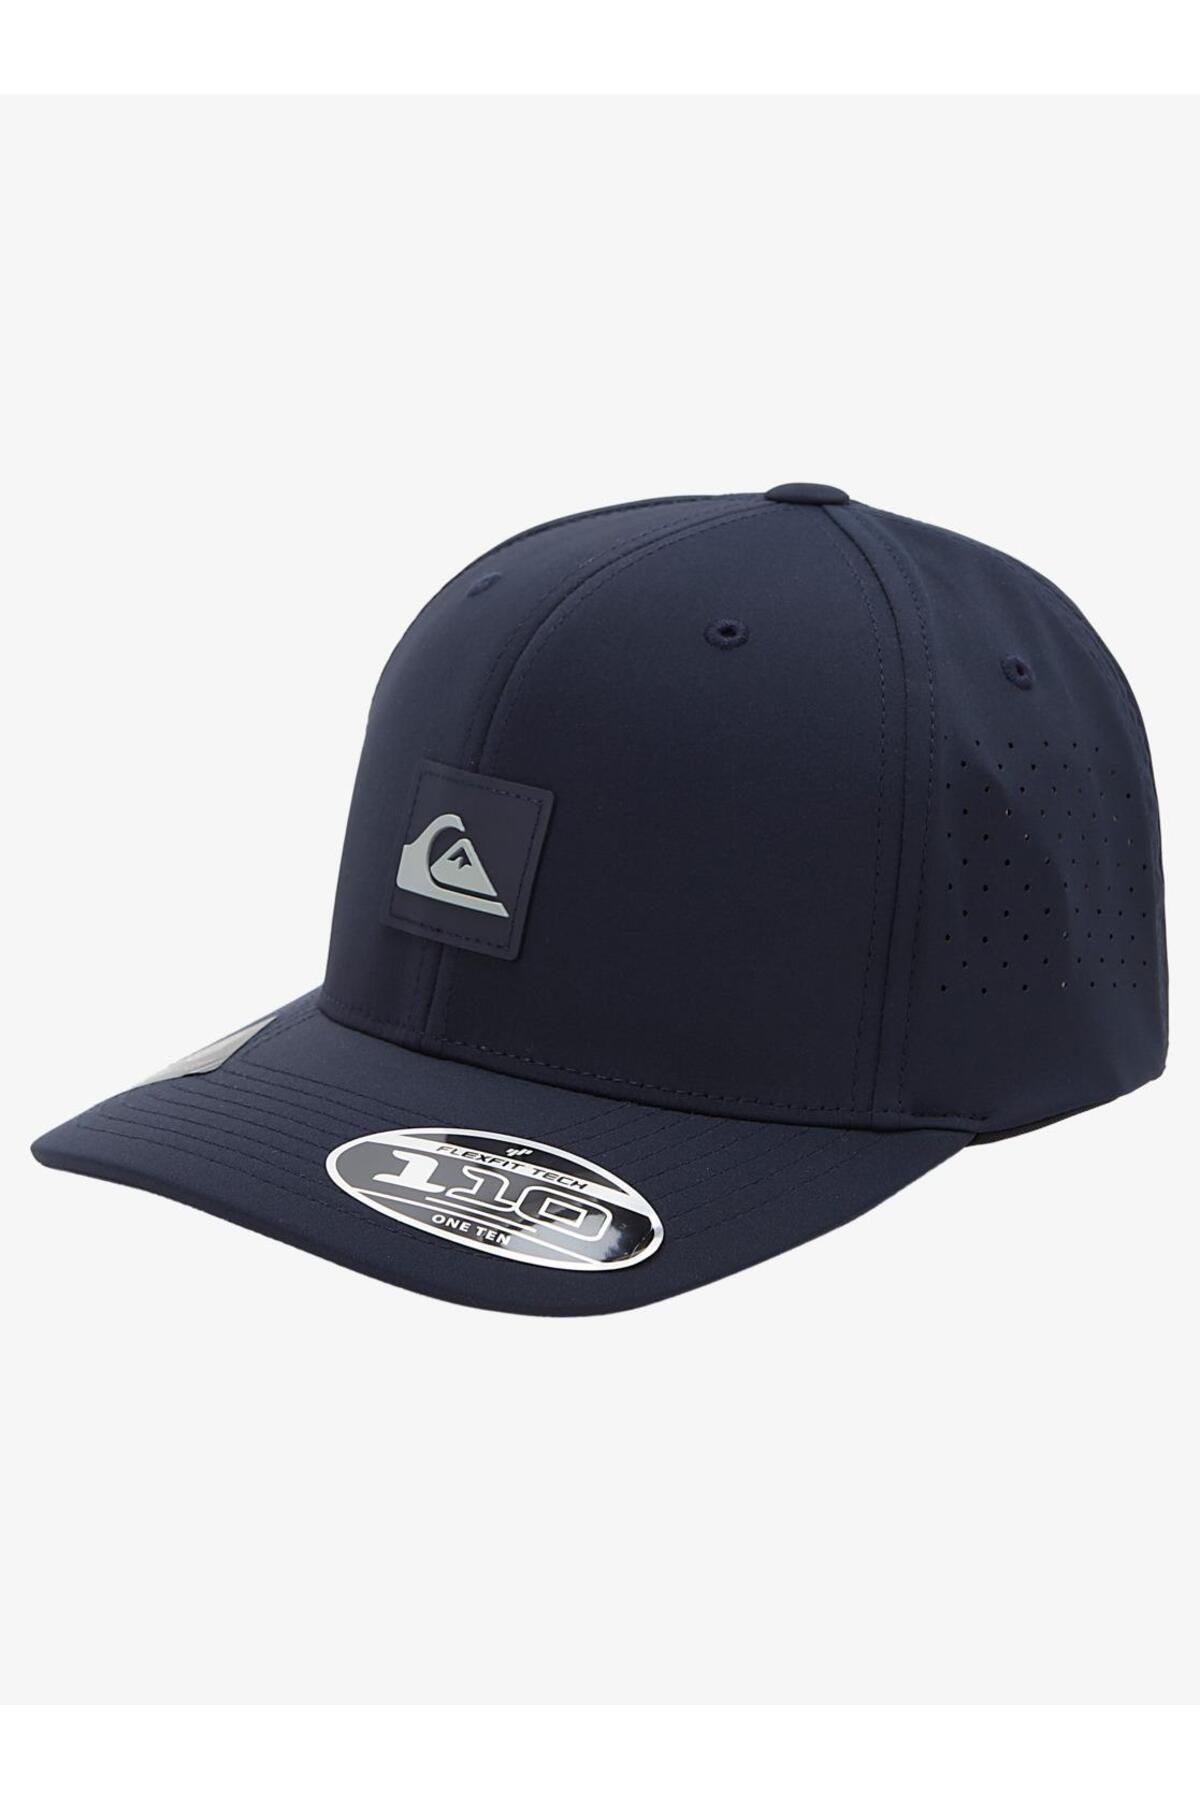 Quiksilver ADAPTED